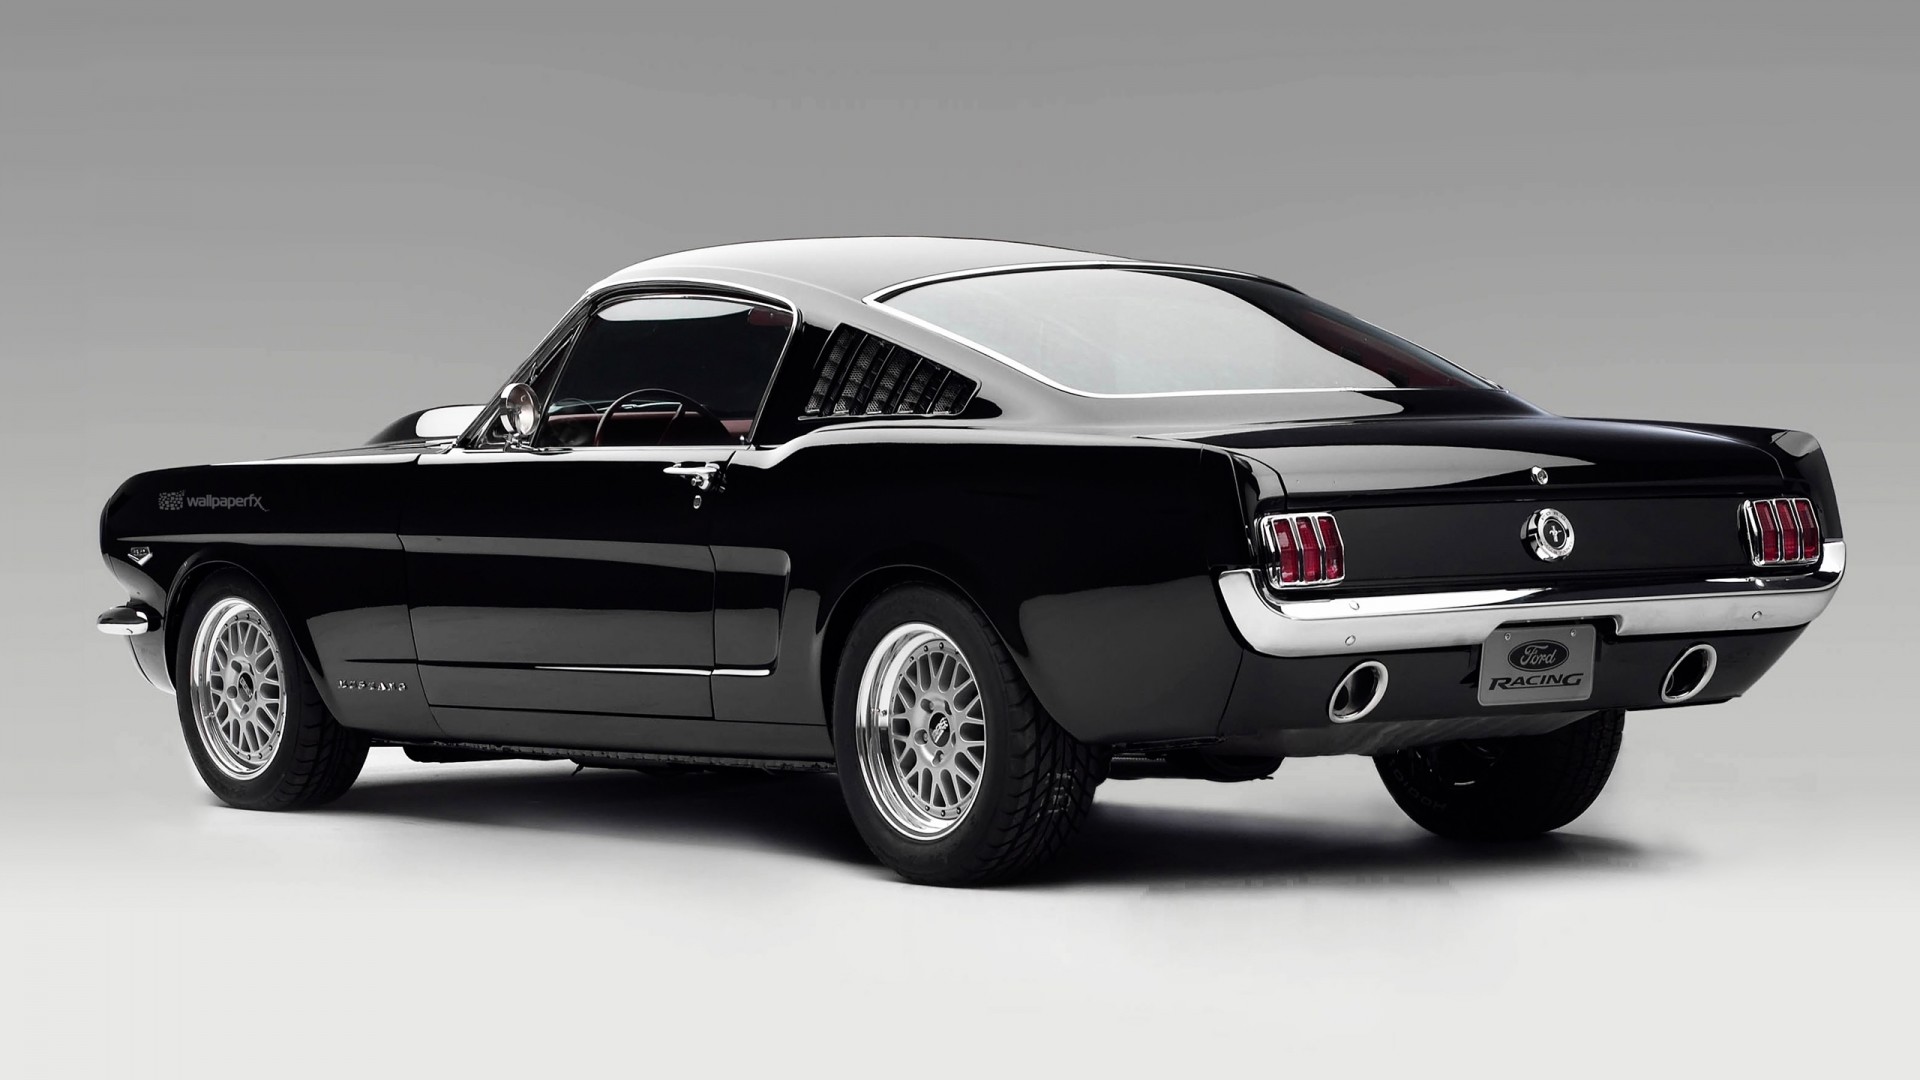 1920x1080 1965 Ford Mustang Fastback with Cammer Engine. My dream car